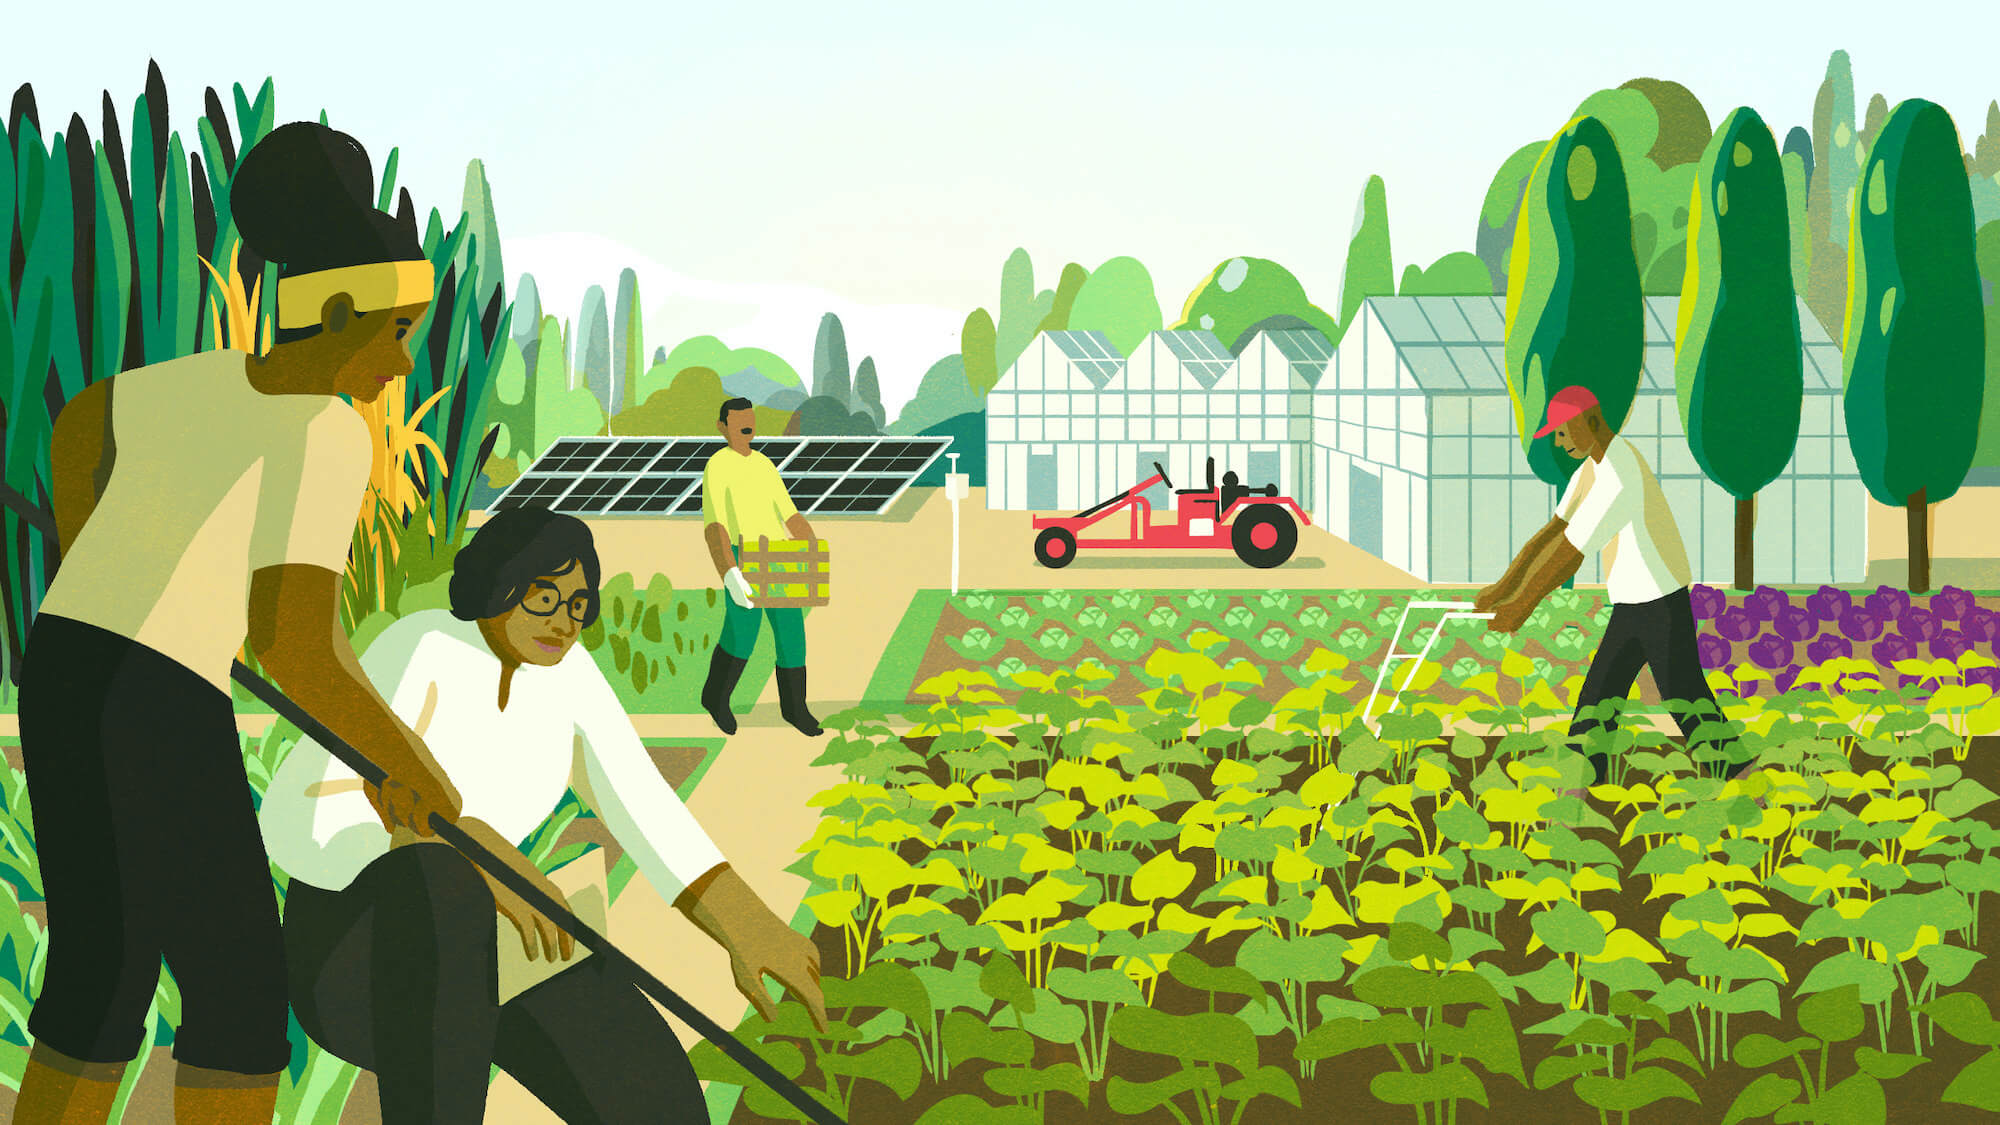 Illustration of regenerative agriculture, with solar-panels, diversified crops, greenhouses, and and Oggun tractor in the background (May 2021)